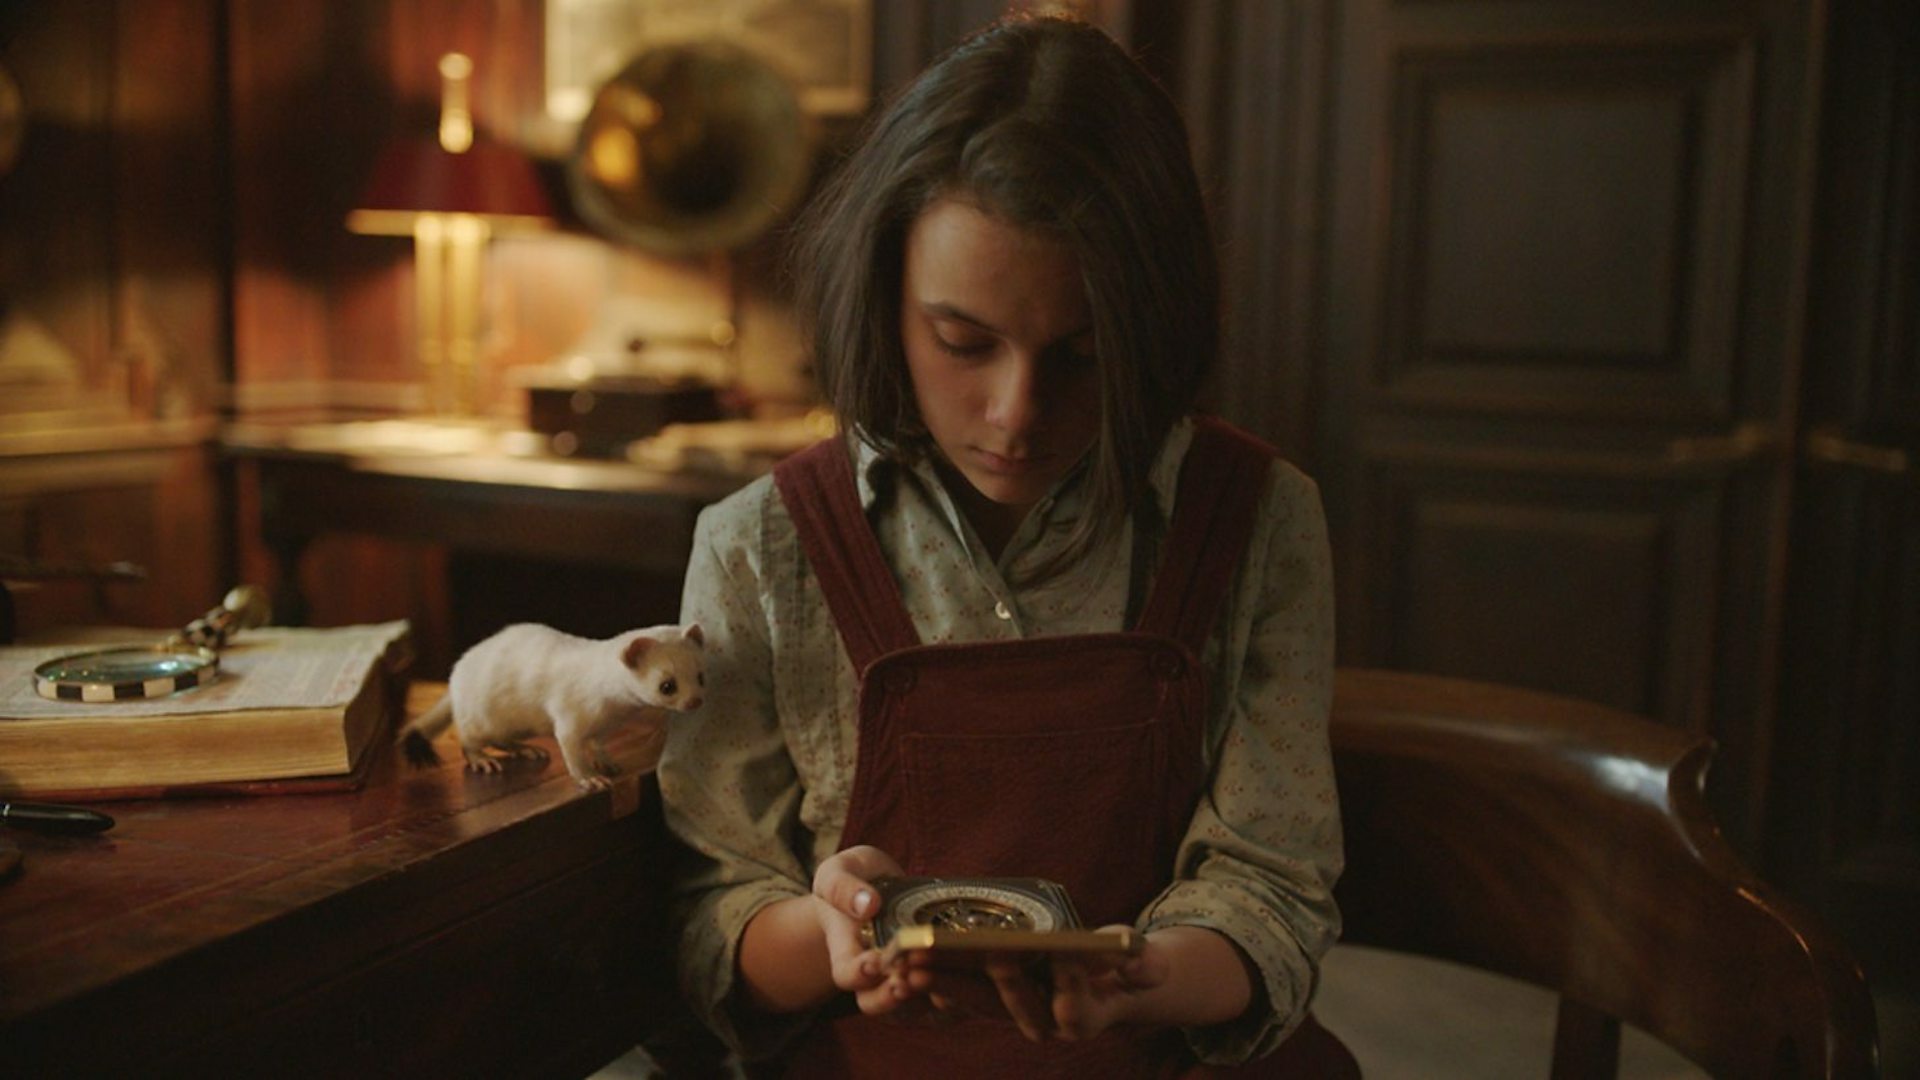 Lyra (Dafne Keen) and Pantalaimon in the BBC's "His Dark Materials".